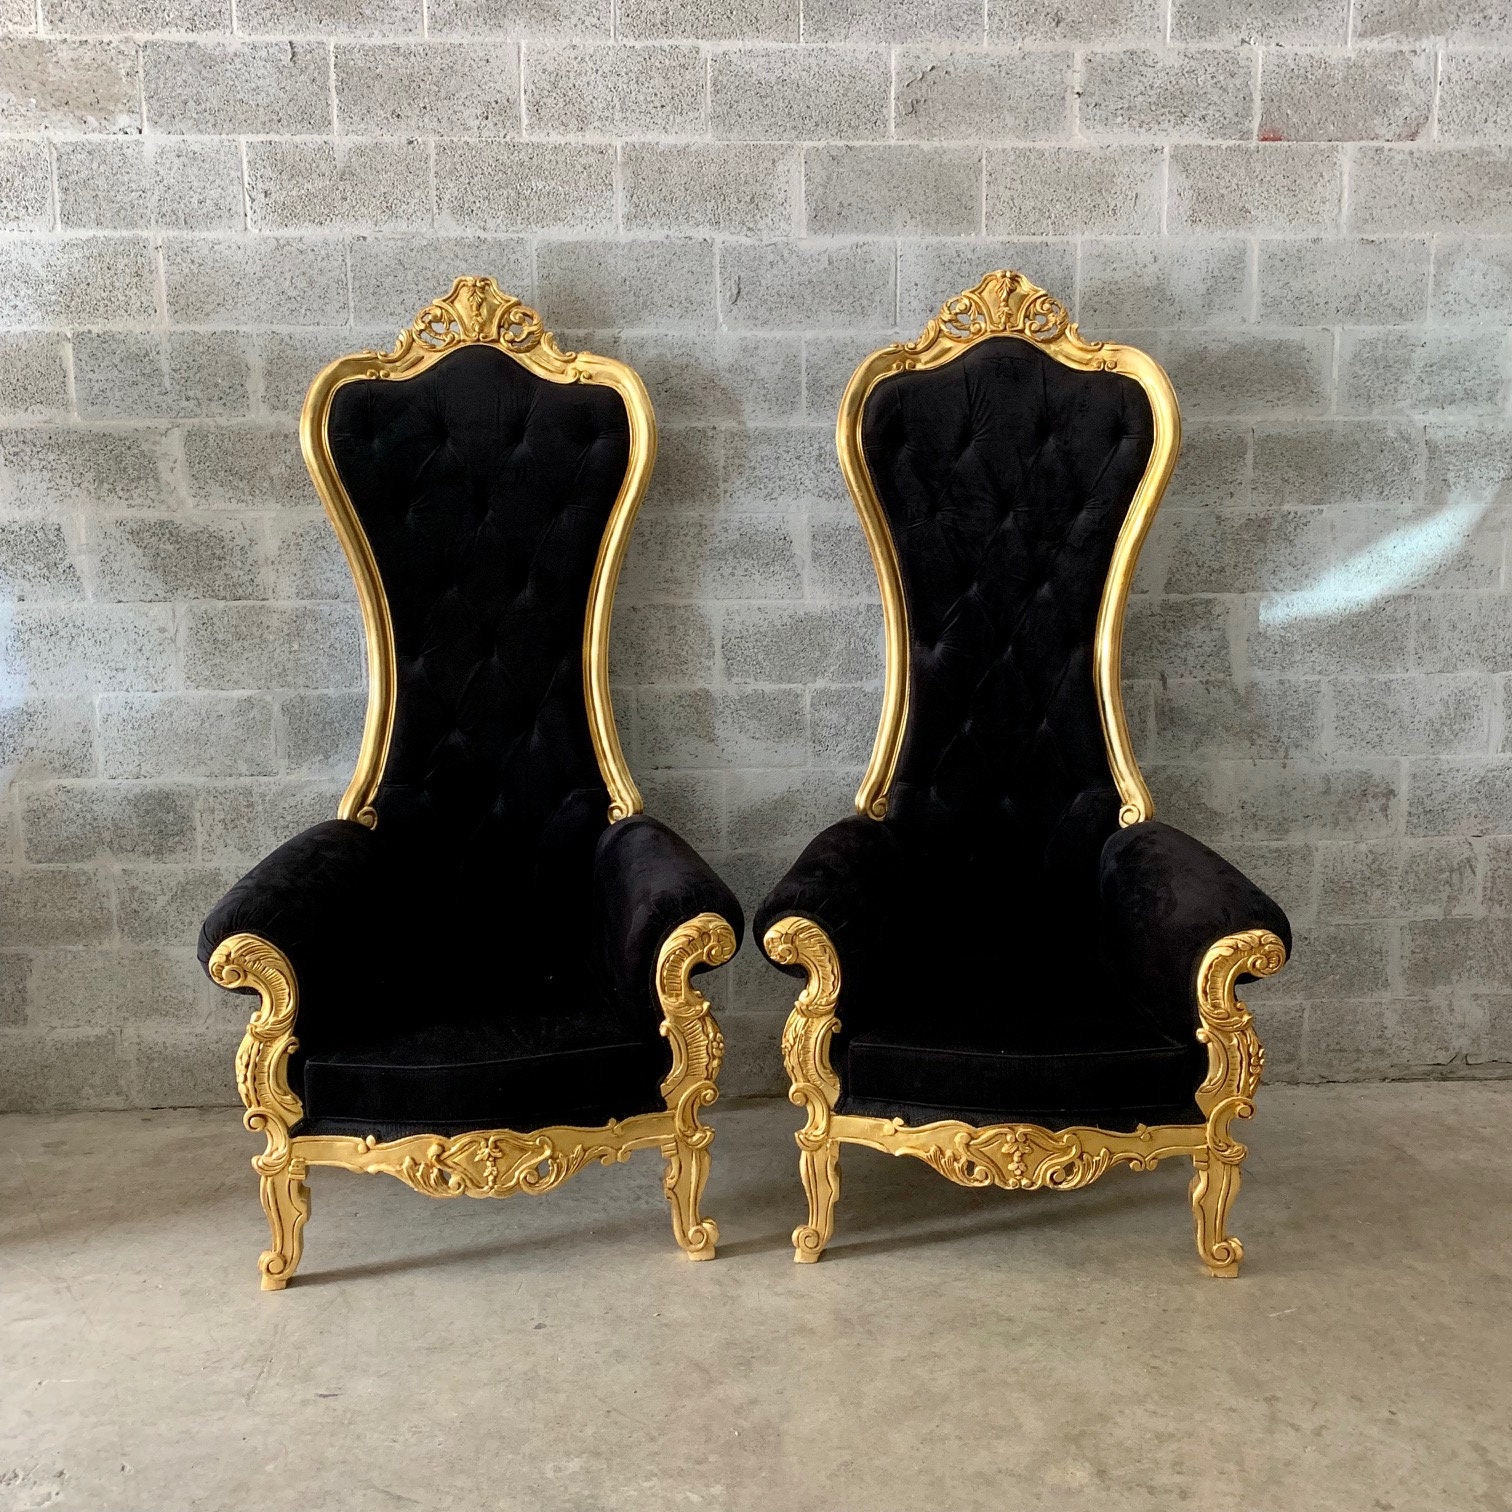 Black Throne Chair Black Velvet Chair 2 Available French Chair